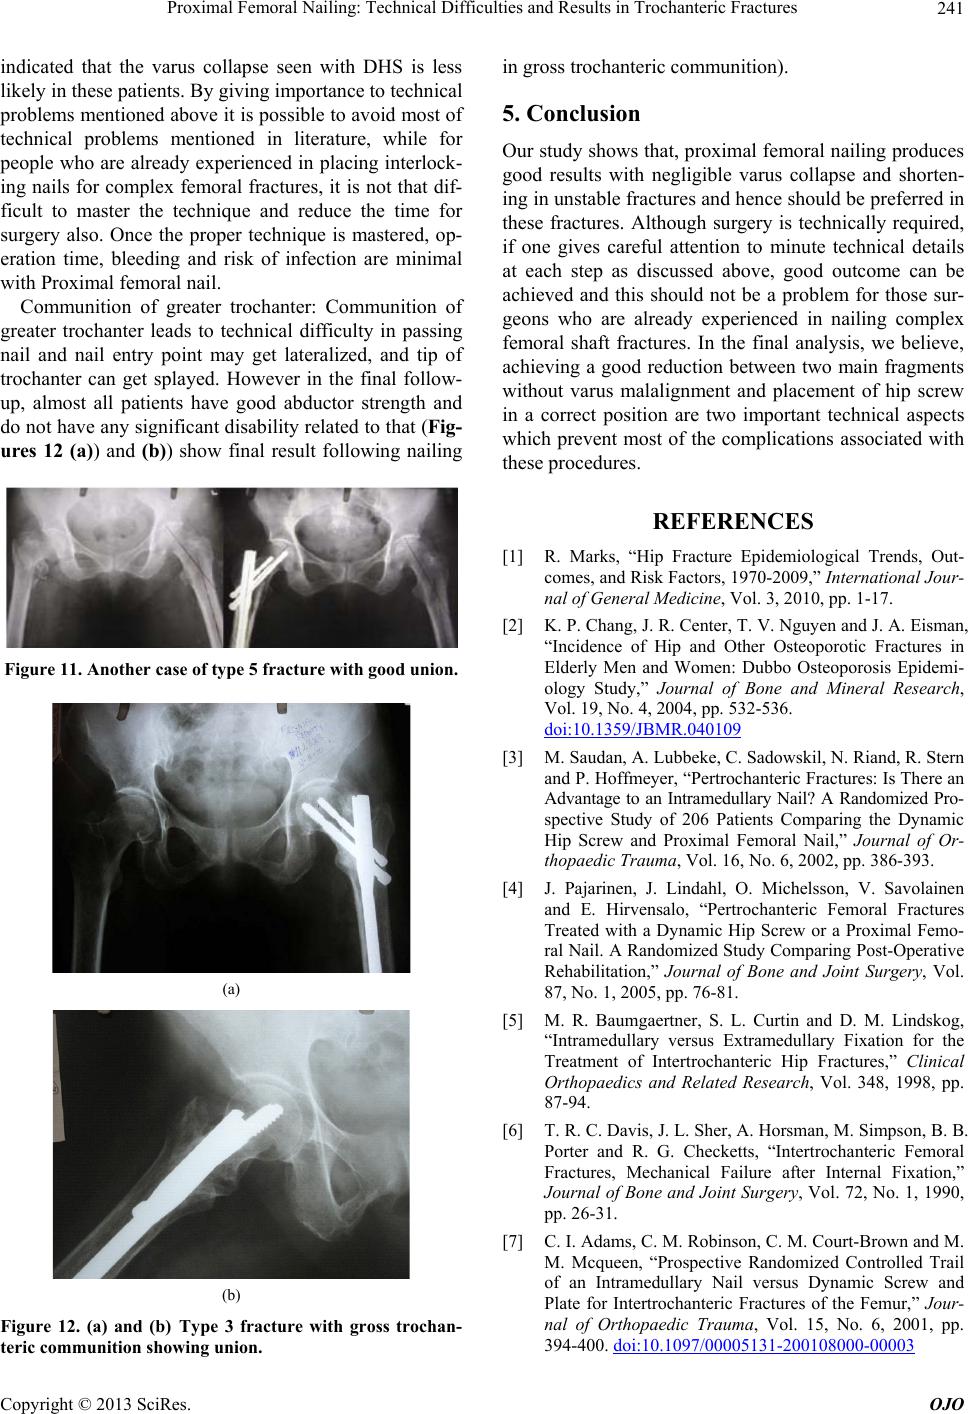 Proximal Femoral Nailing: Technical Difficulties and Results in Trochanteric  Fractures